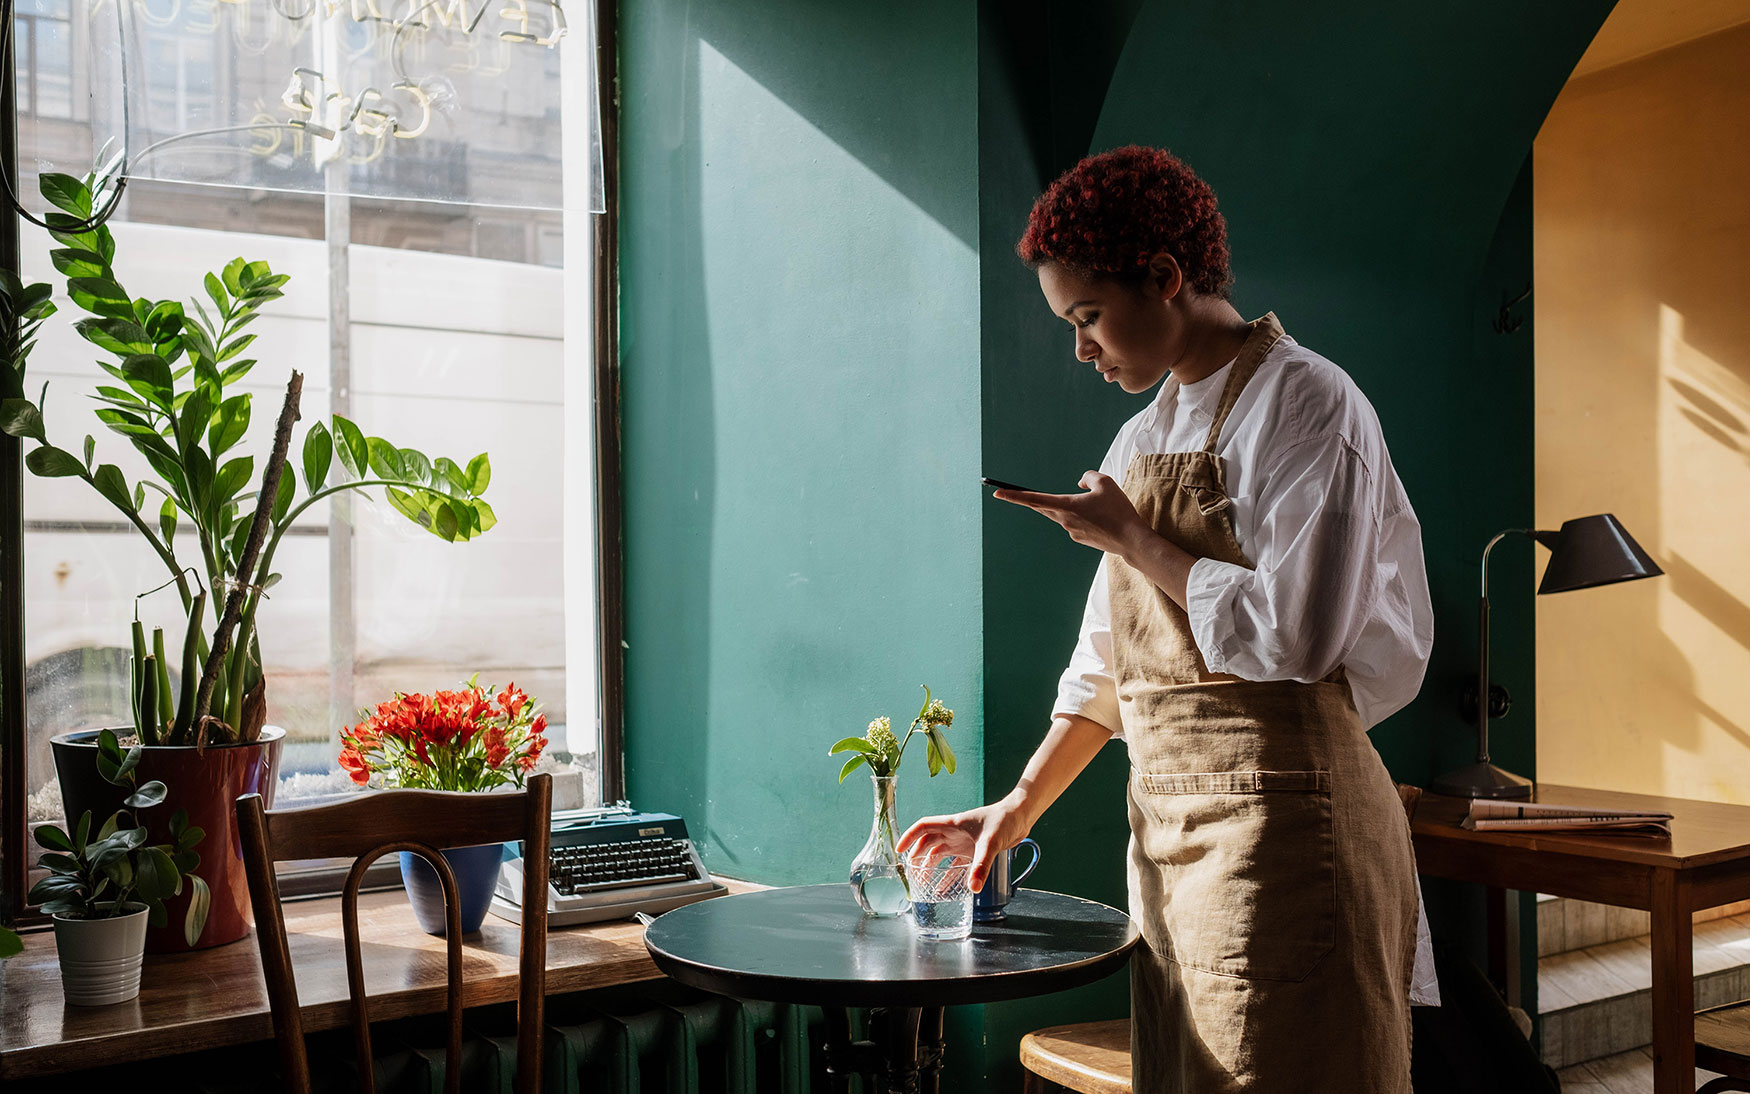 restaurant server in apron sets down glass of water while looking worriedly at phone